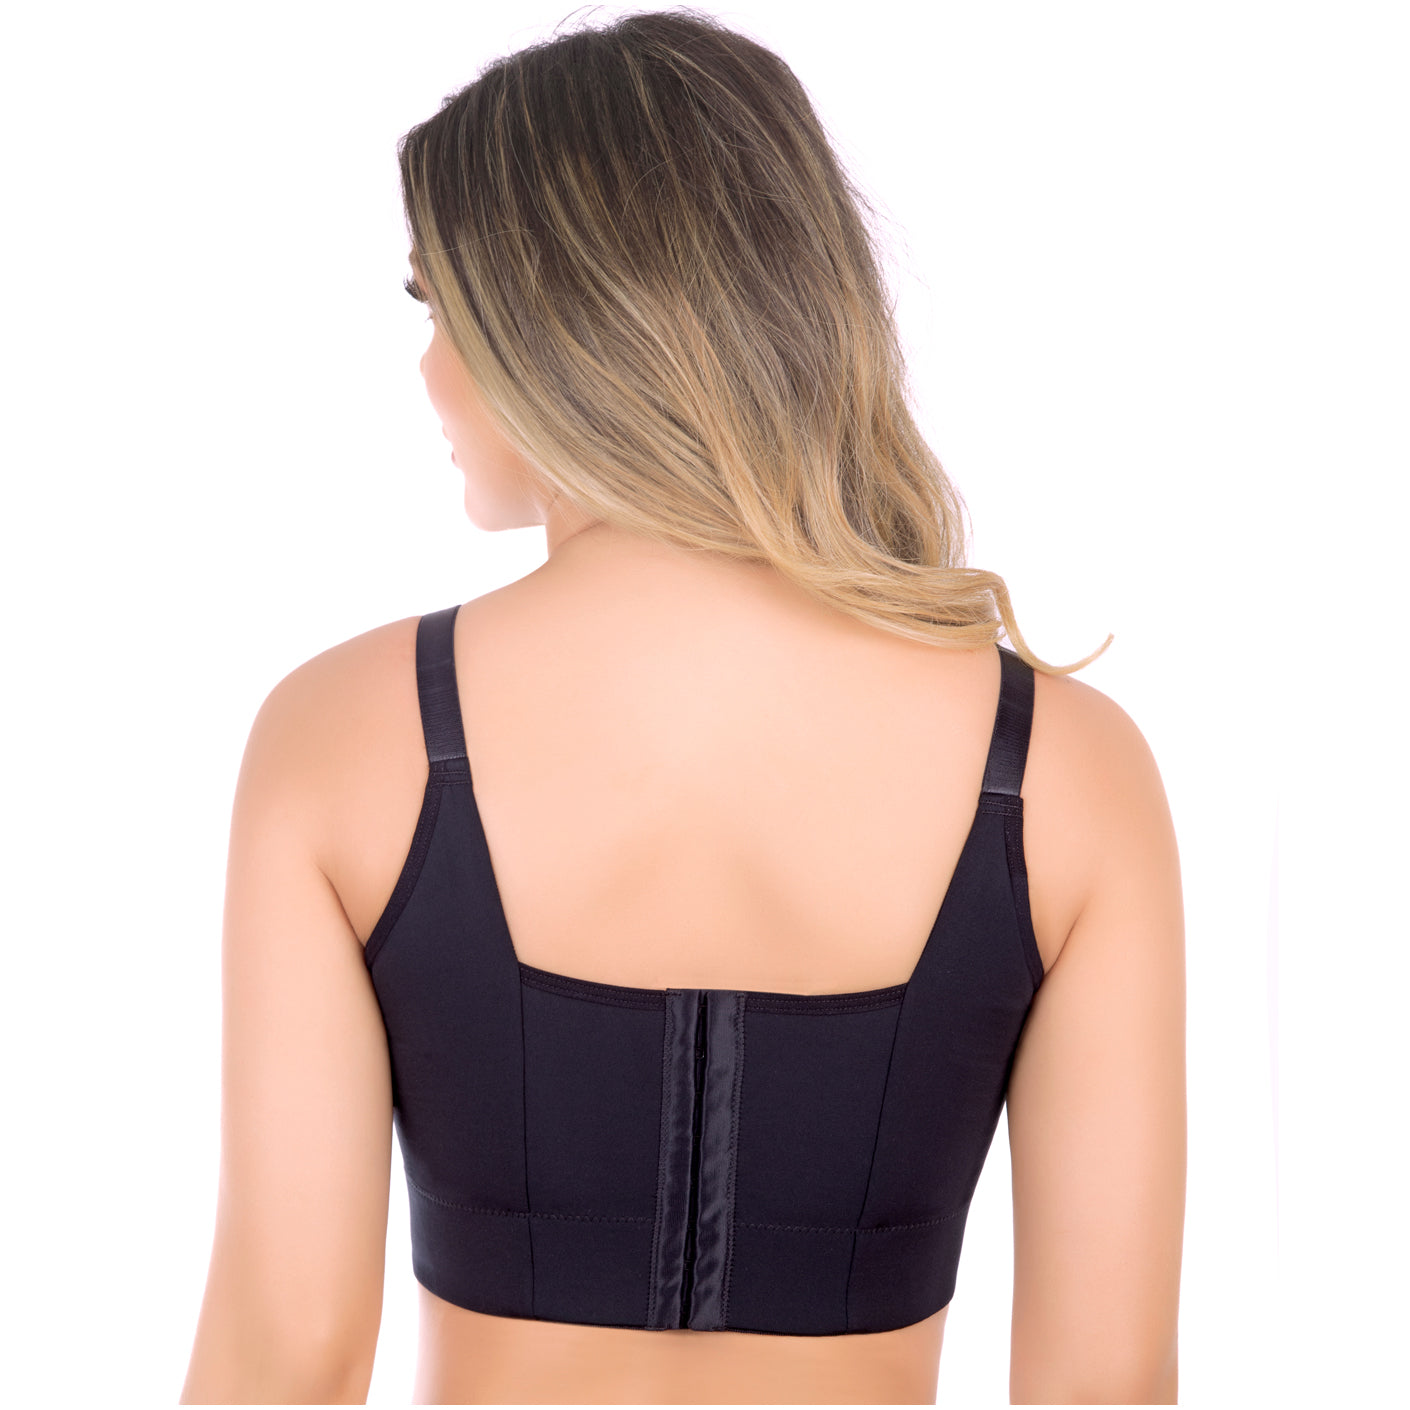 SJOUCH Adhesive Bra No Underwire Push Up Sports Bras for India